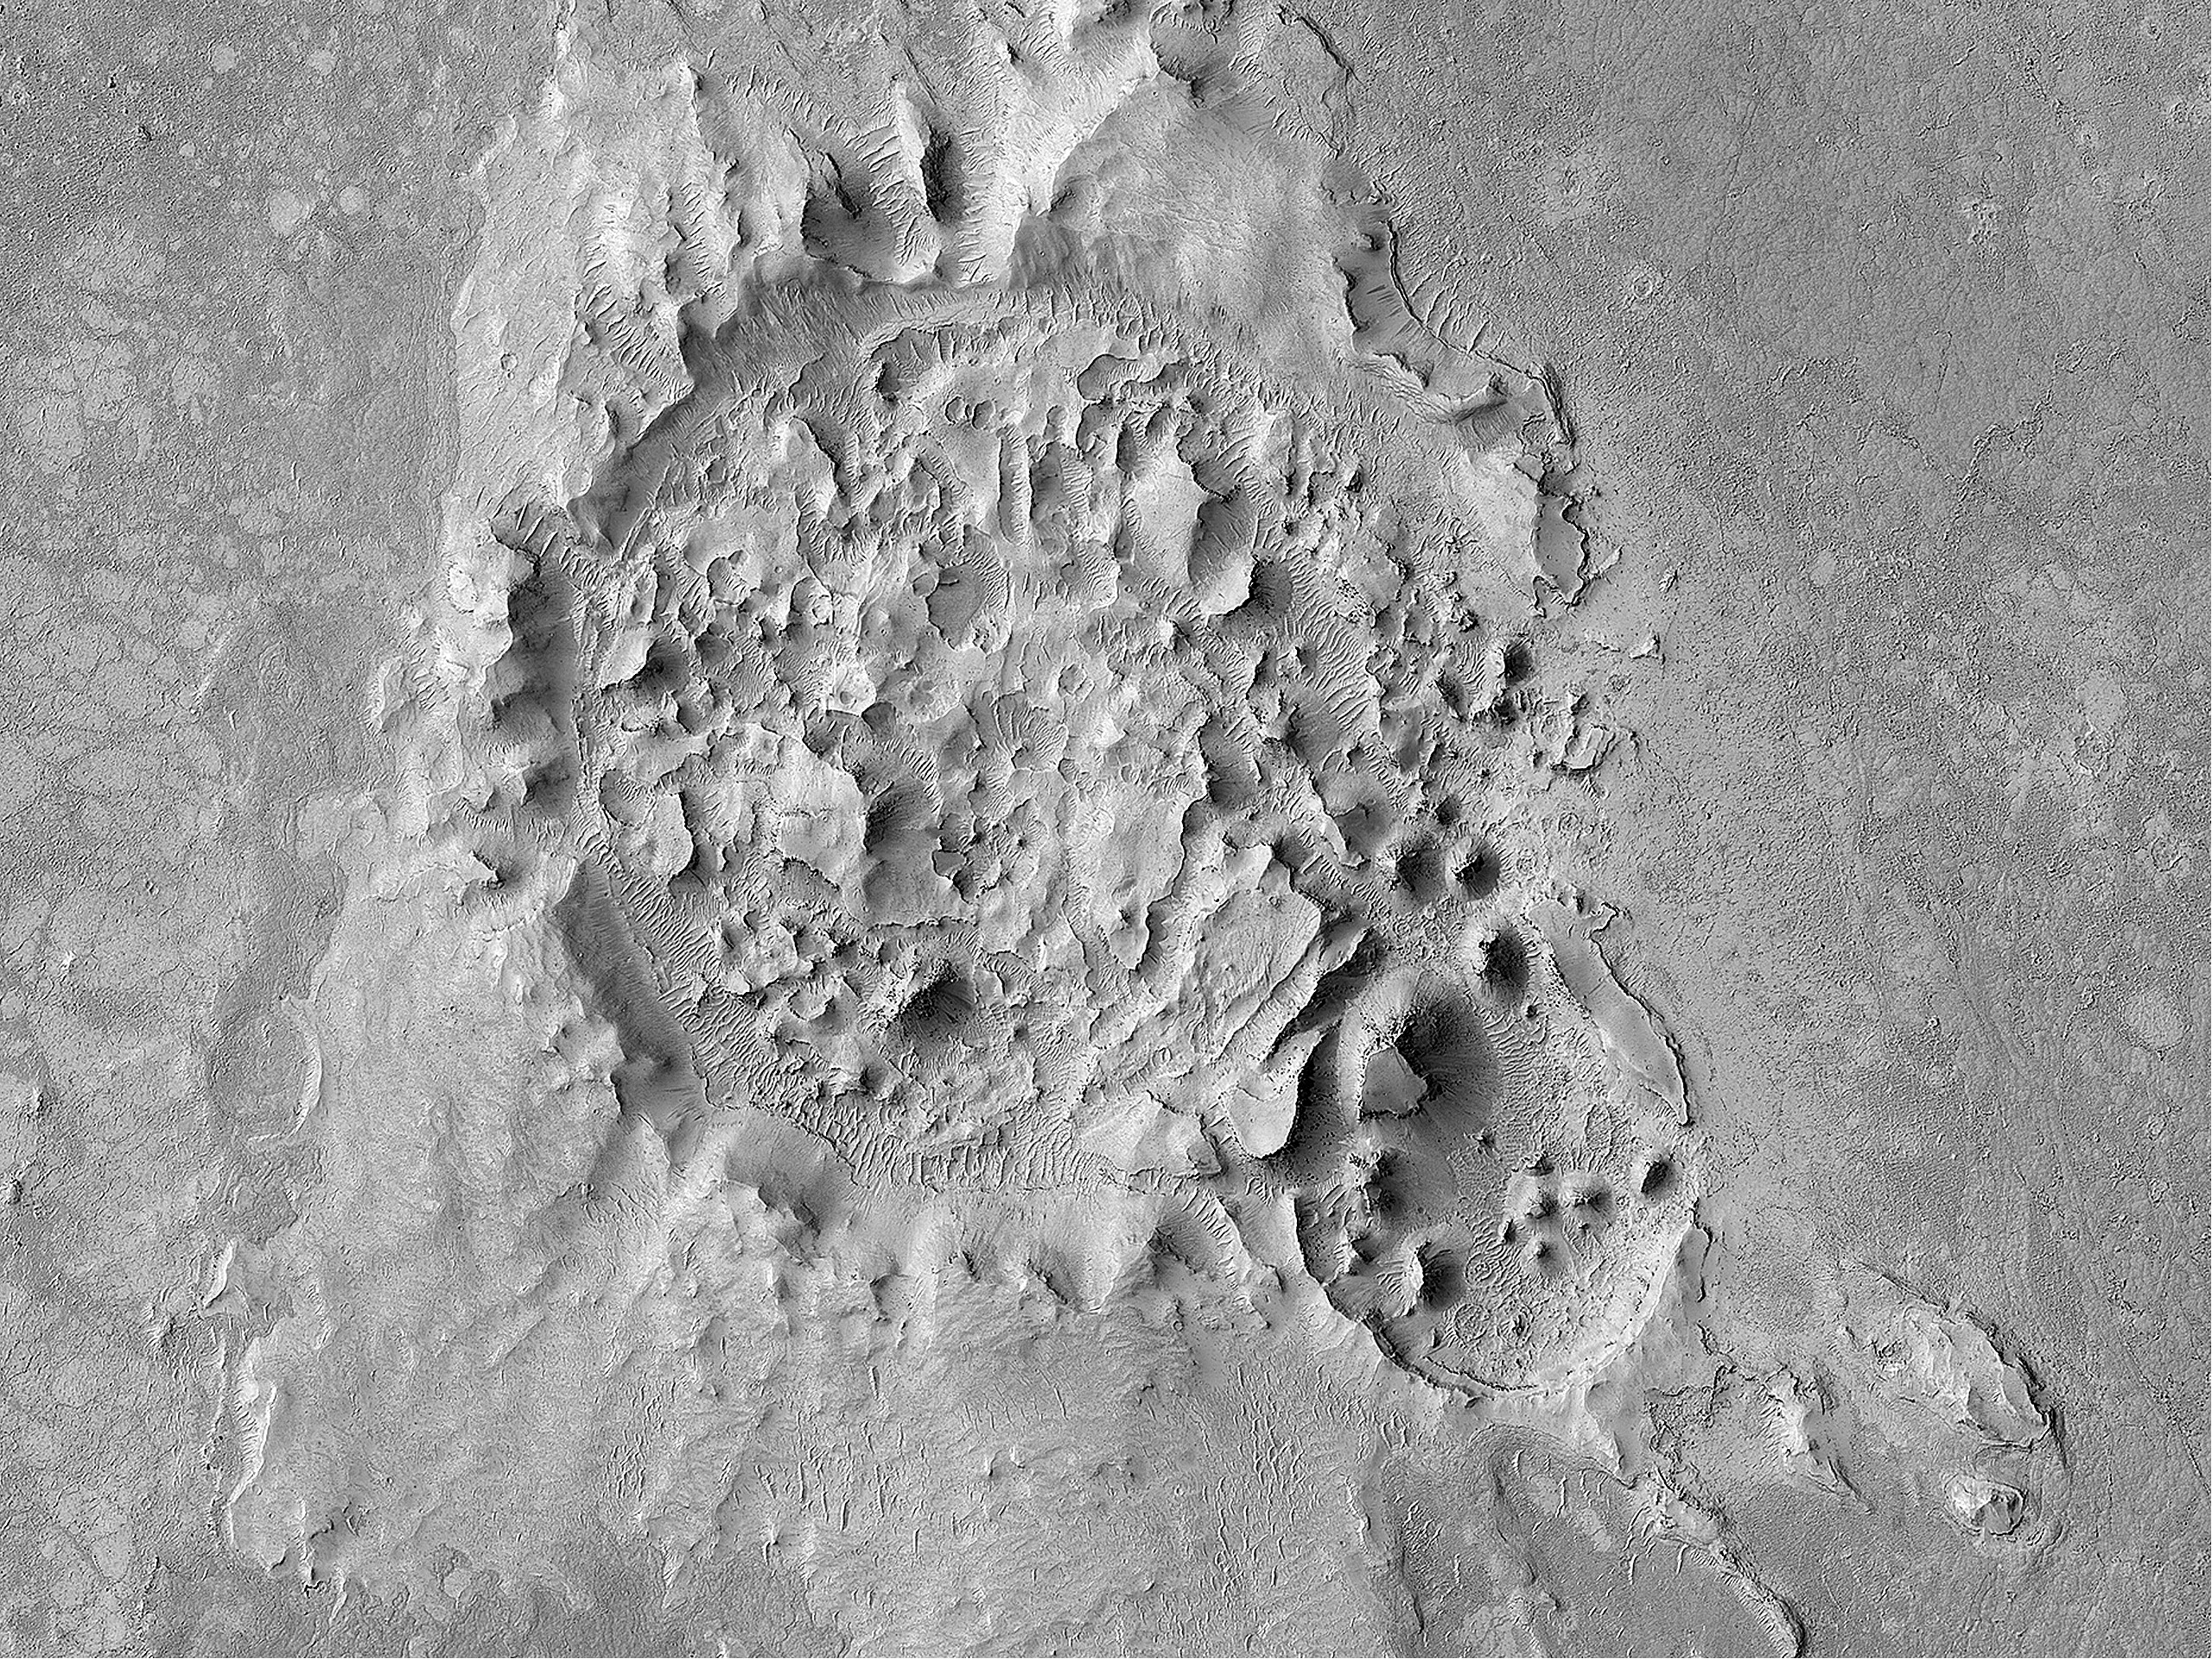 A Highly Disrupted Crater